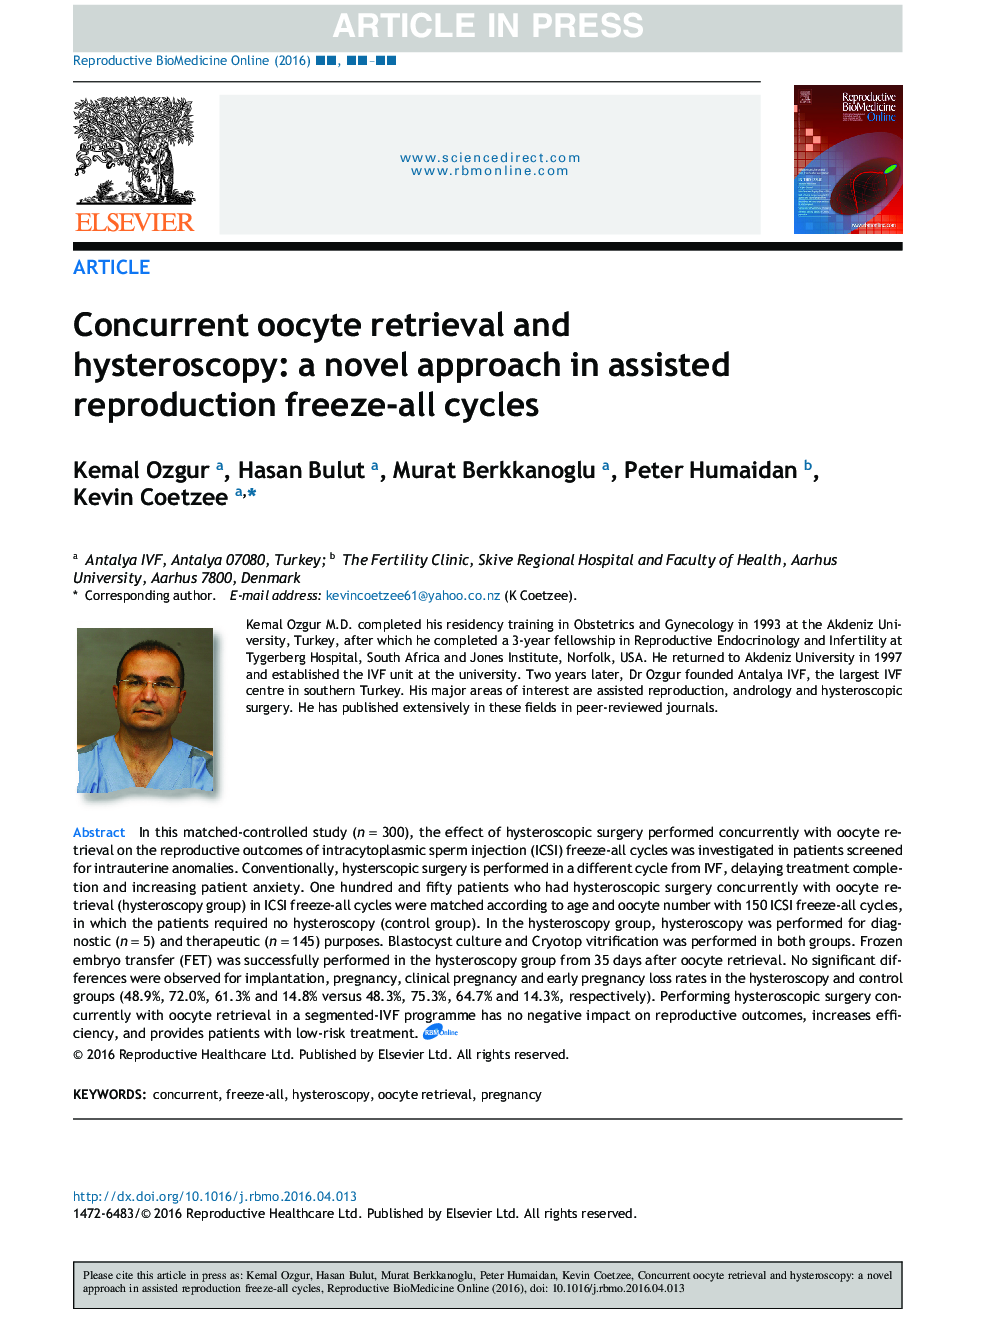 Concurrent oocyte retrieval and hysteroscopy: a novel approach in assisted reproduction freeze-all cycles